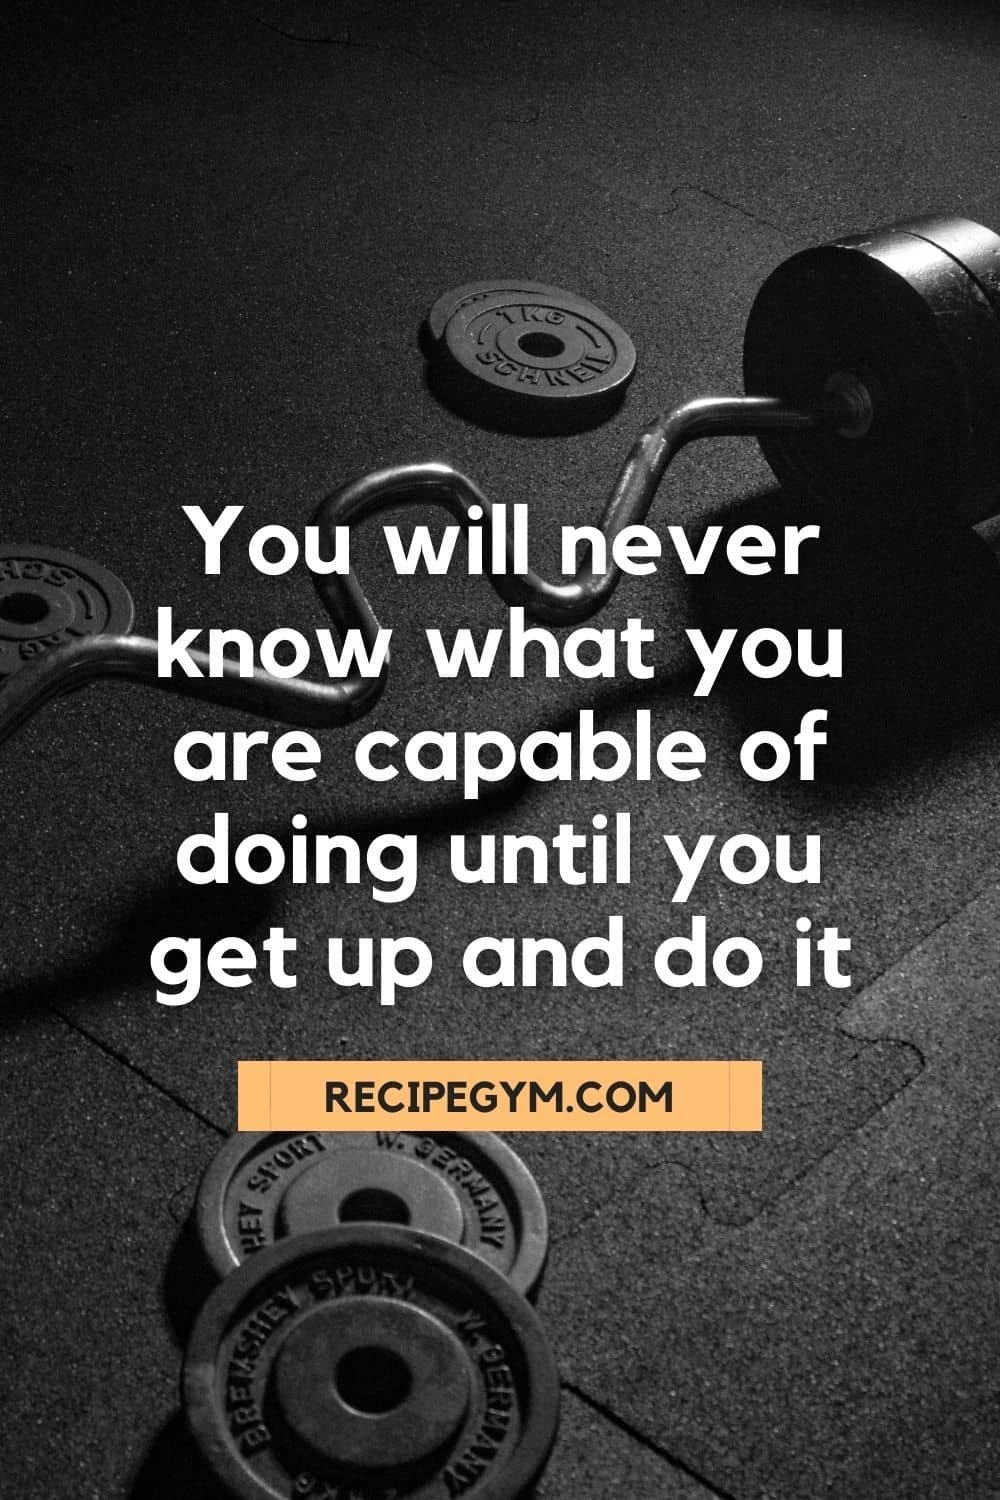 You will never know what you are capable of doing until you get up and do it